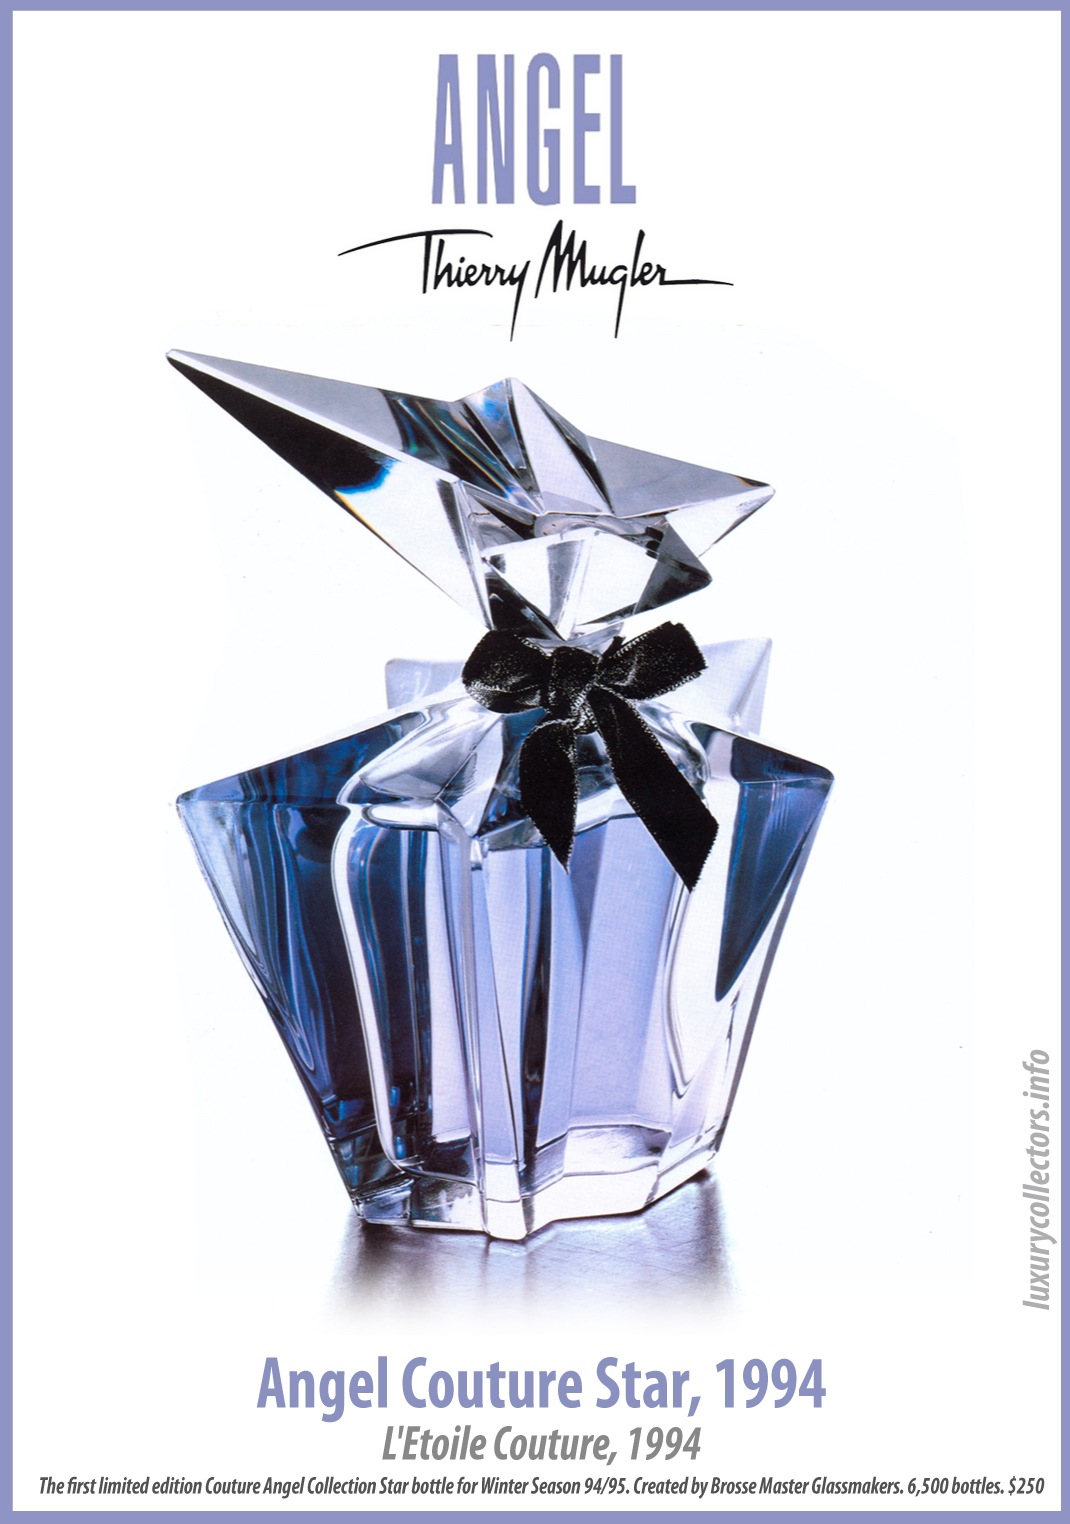 Thierry Mugler's first limited edition numbered Couture Star Perfume Bottle